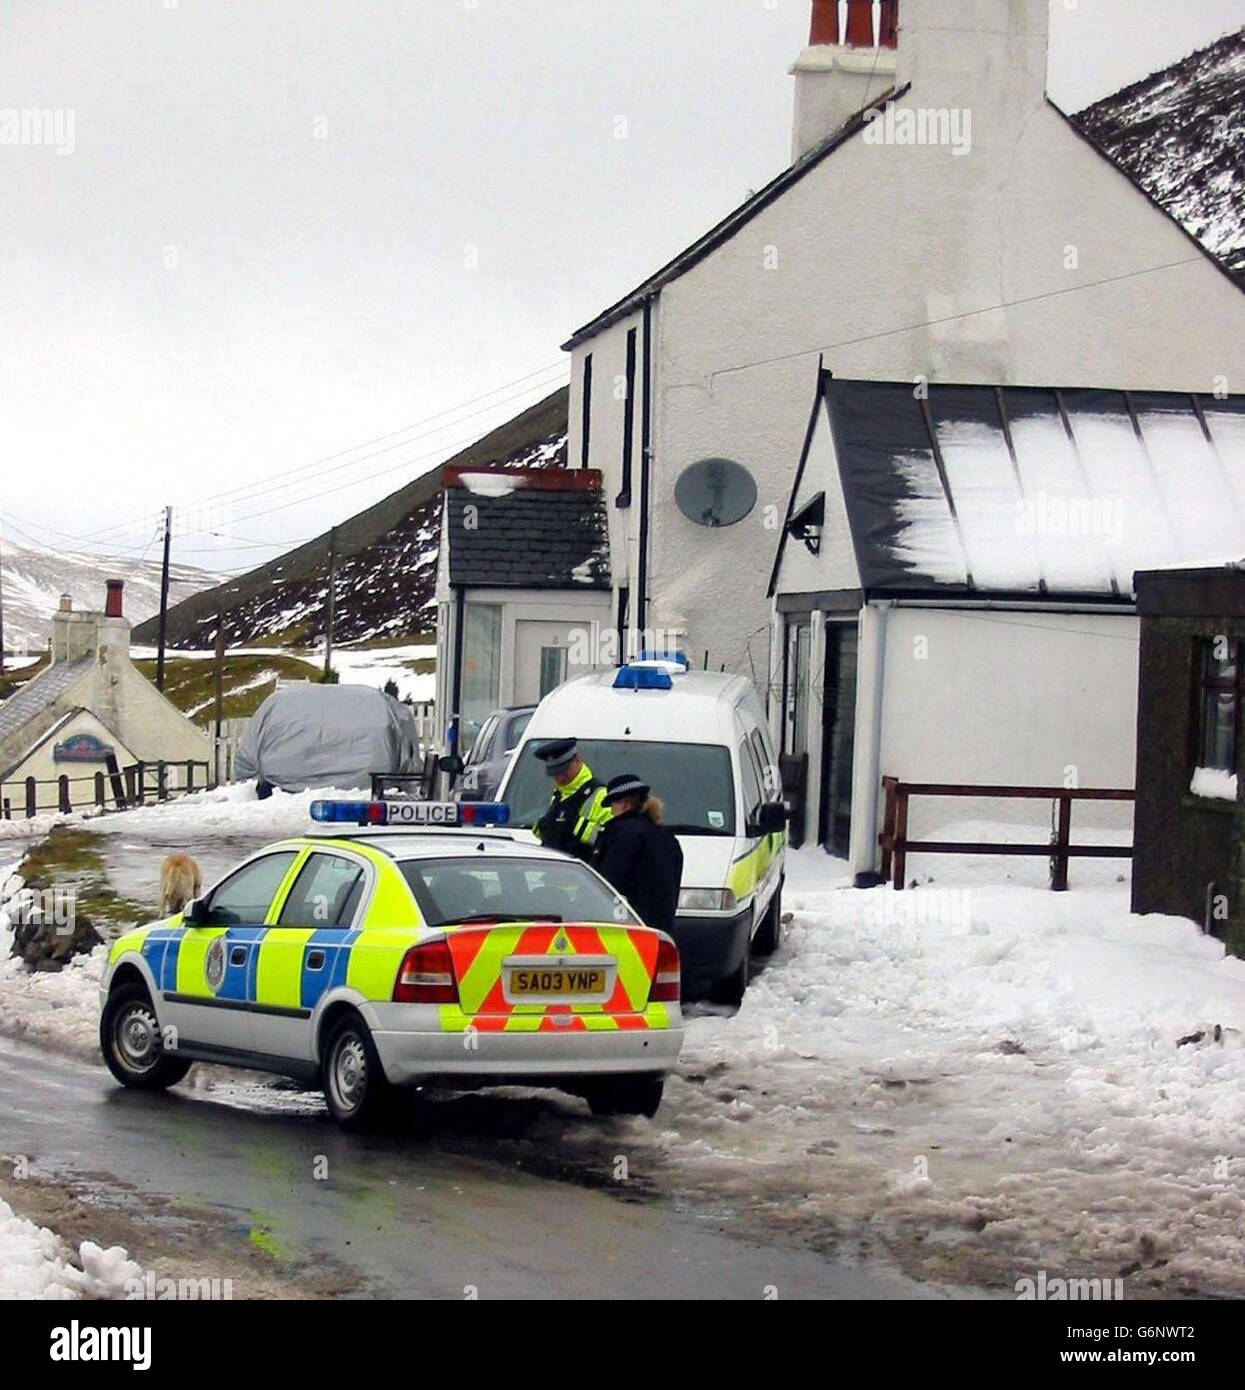 Two police officers stand outside 8 Church Street, Wanlockhead, near Sanquhar, Dumfries and Galloway, where a 60-year-old woman and a 13-year-old girl died in a house fire during the early hours of New Year's Day. Another person was taken to hospital. The cause of the fire was still being investigated by police and fire officers. Stock Photo